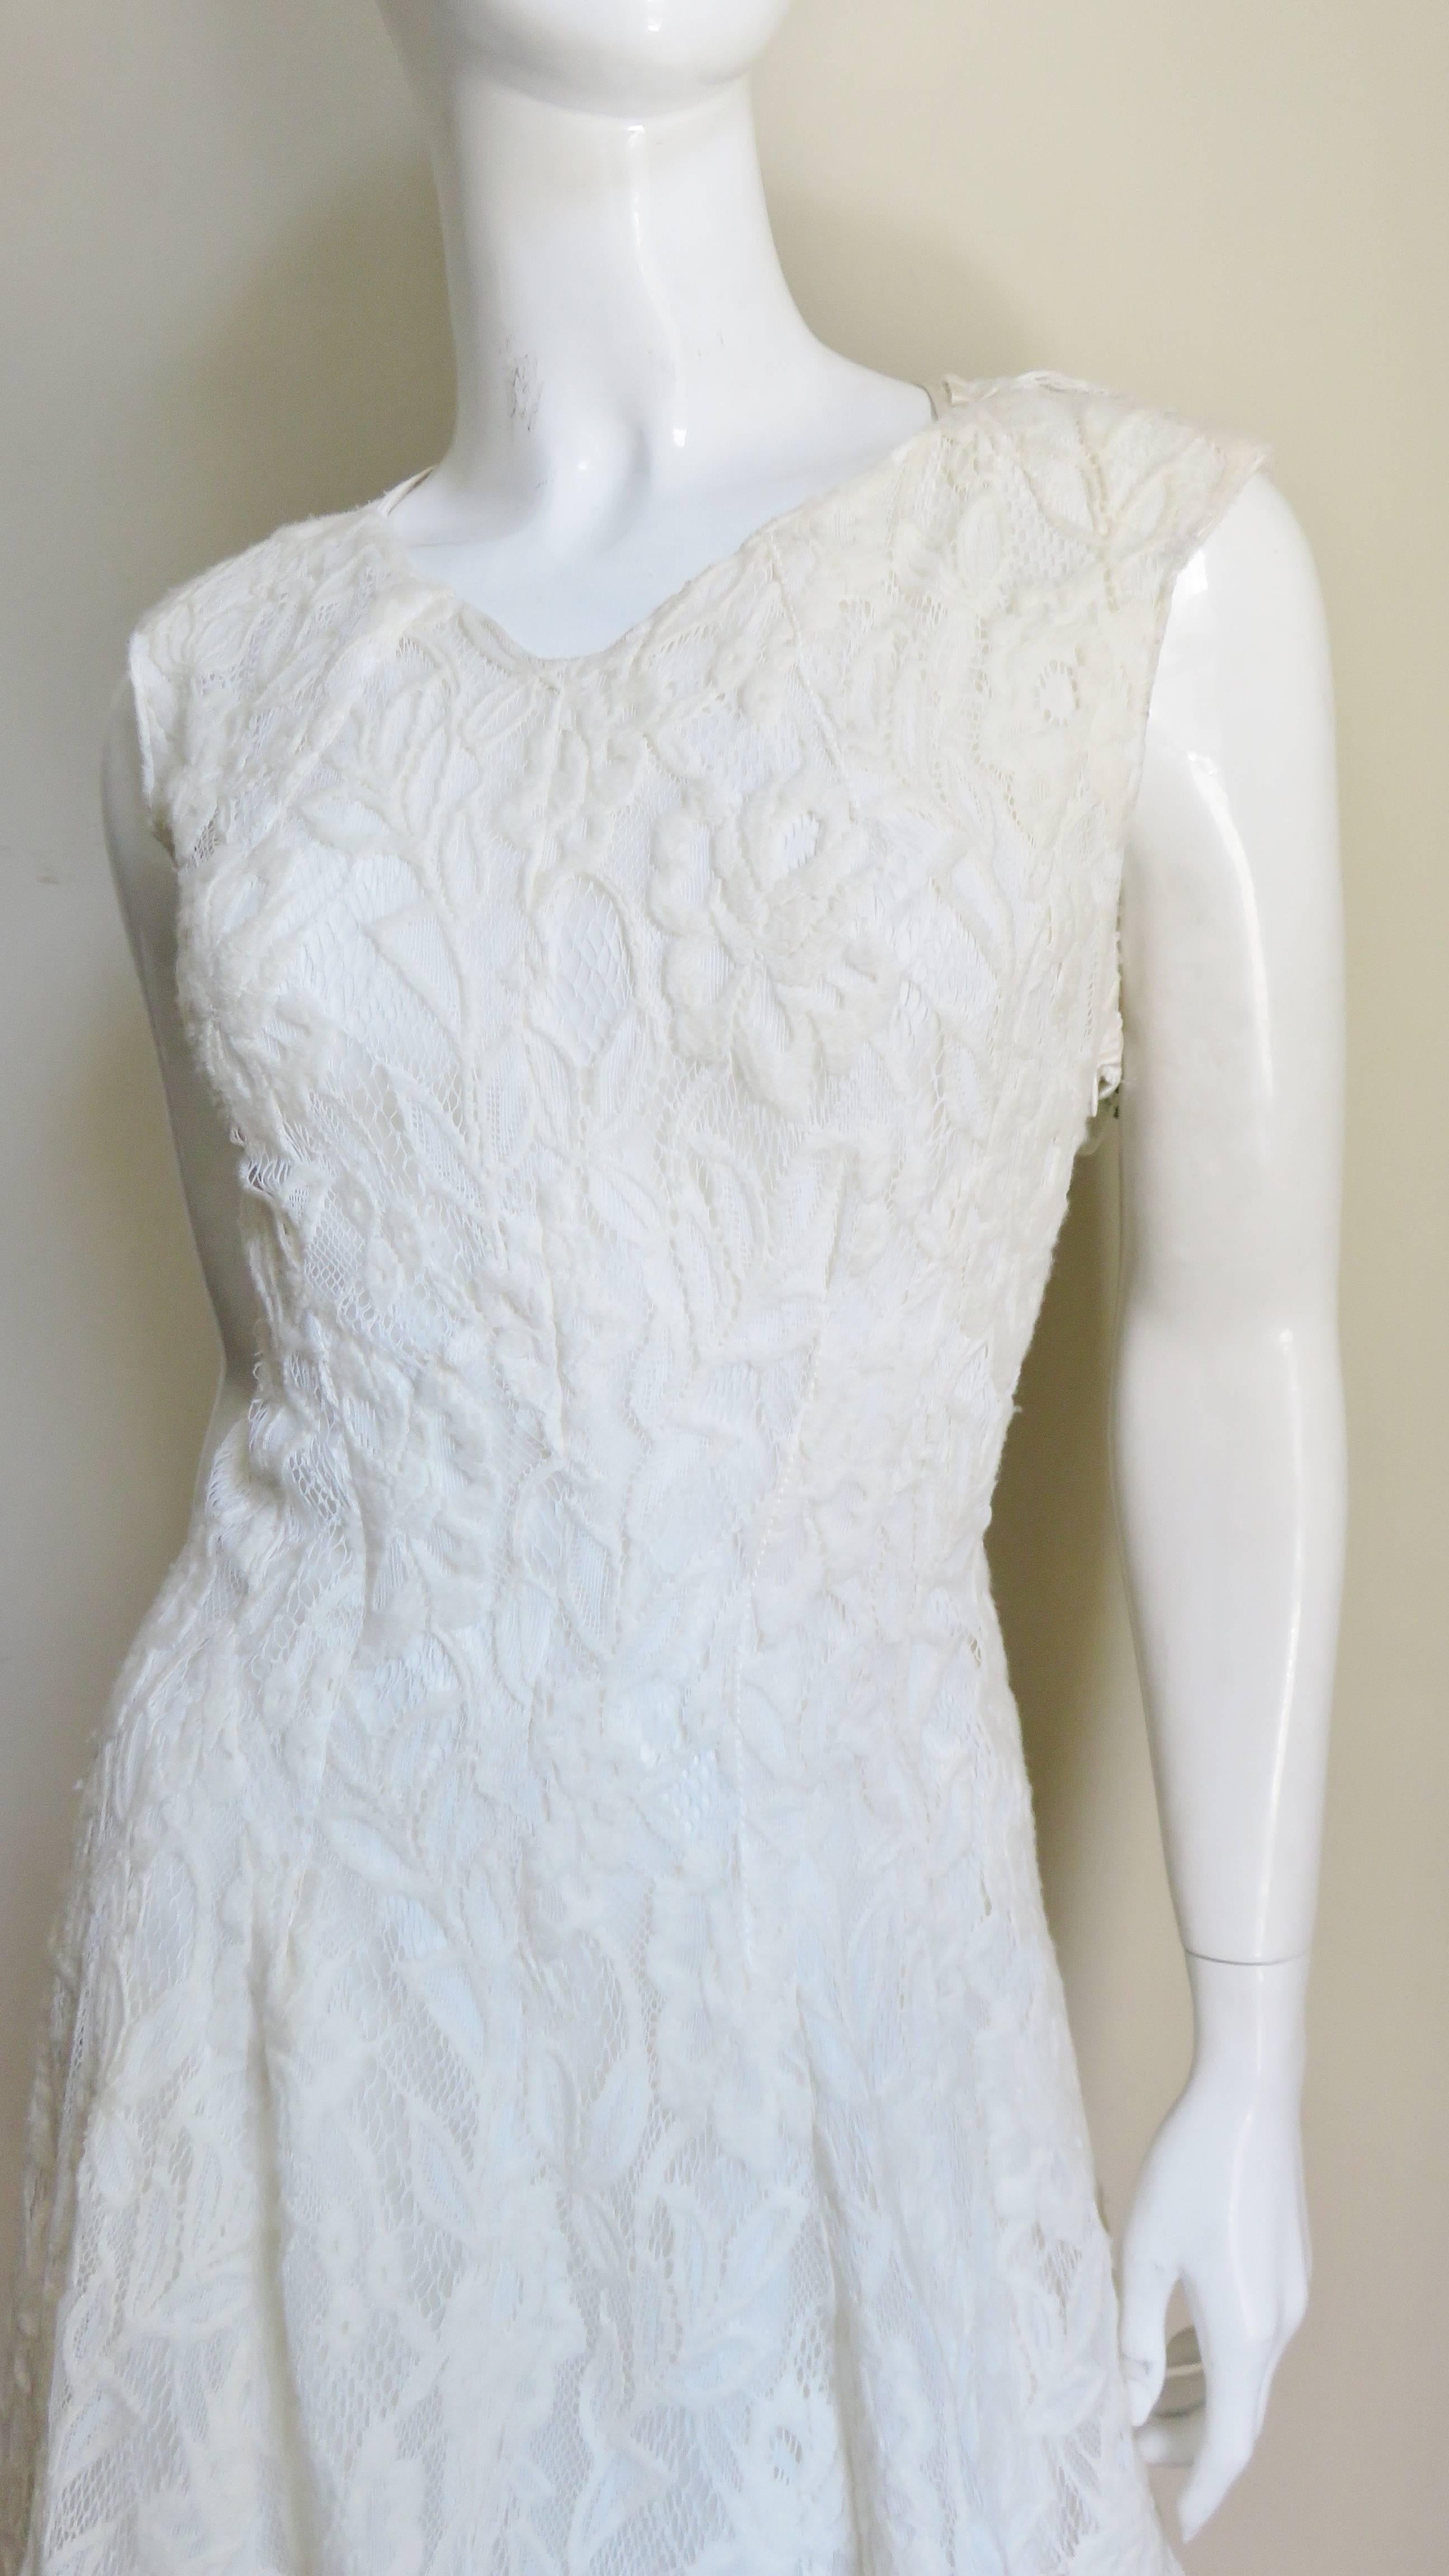 Nina Ricci Lace Dress with Cut out Back In Excellent Condition For Sale In Water Mill, NY